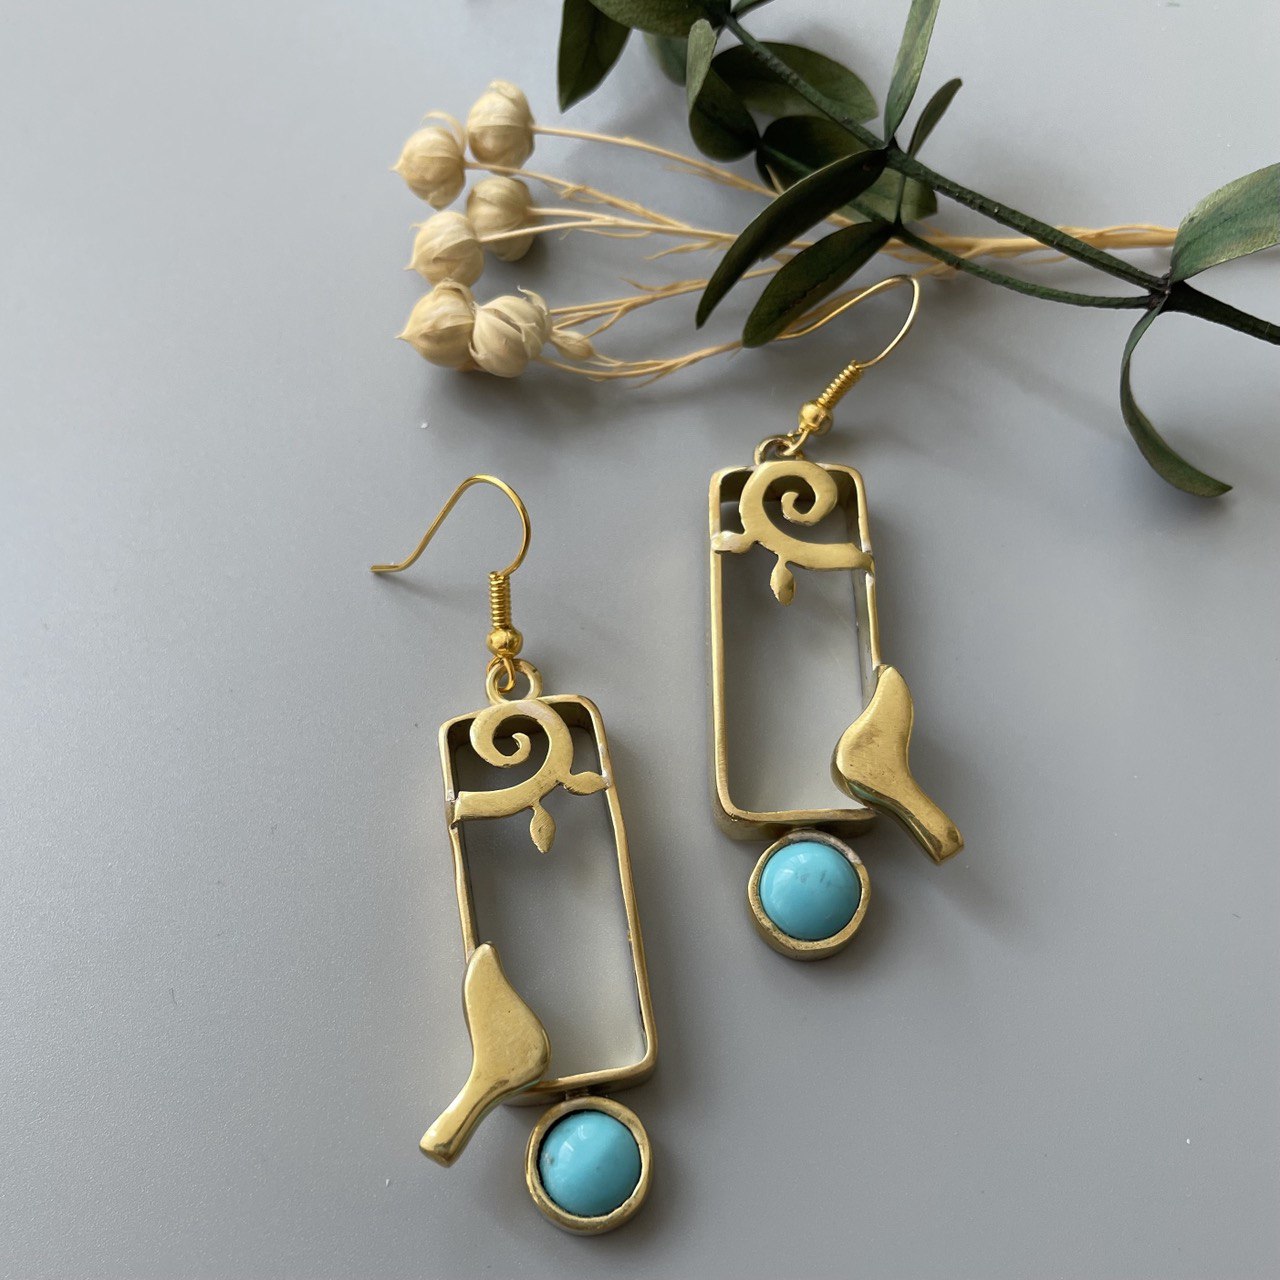 Persian Earrings-Persian Dangle Earrings with Turquoise and Bird: Persian Jewelry-AFRA ART GALLERY